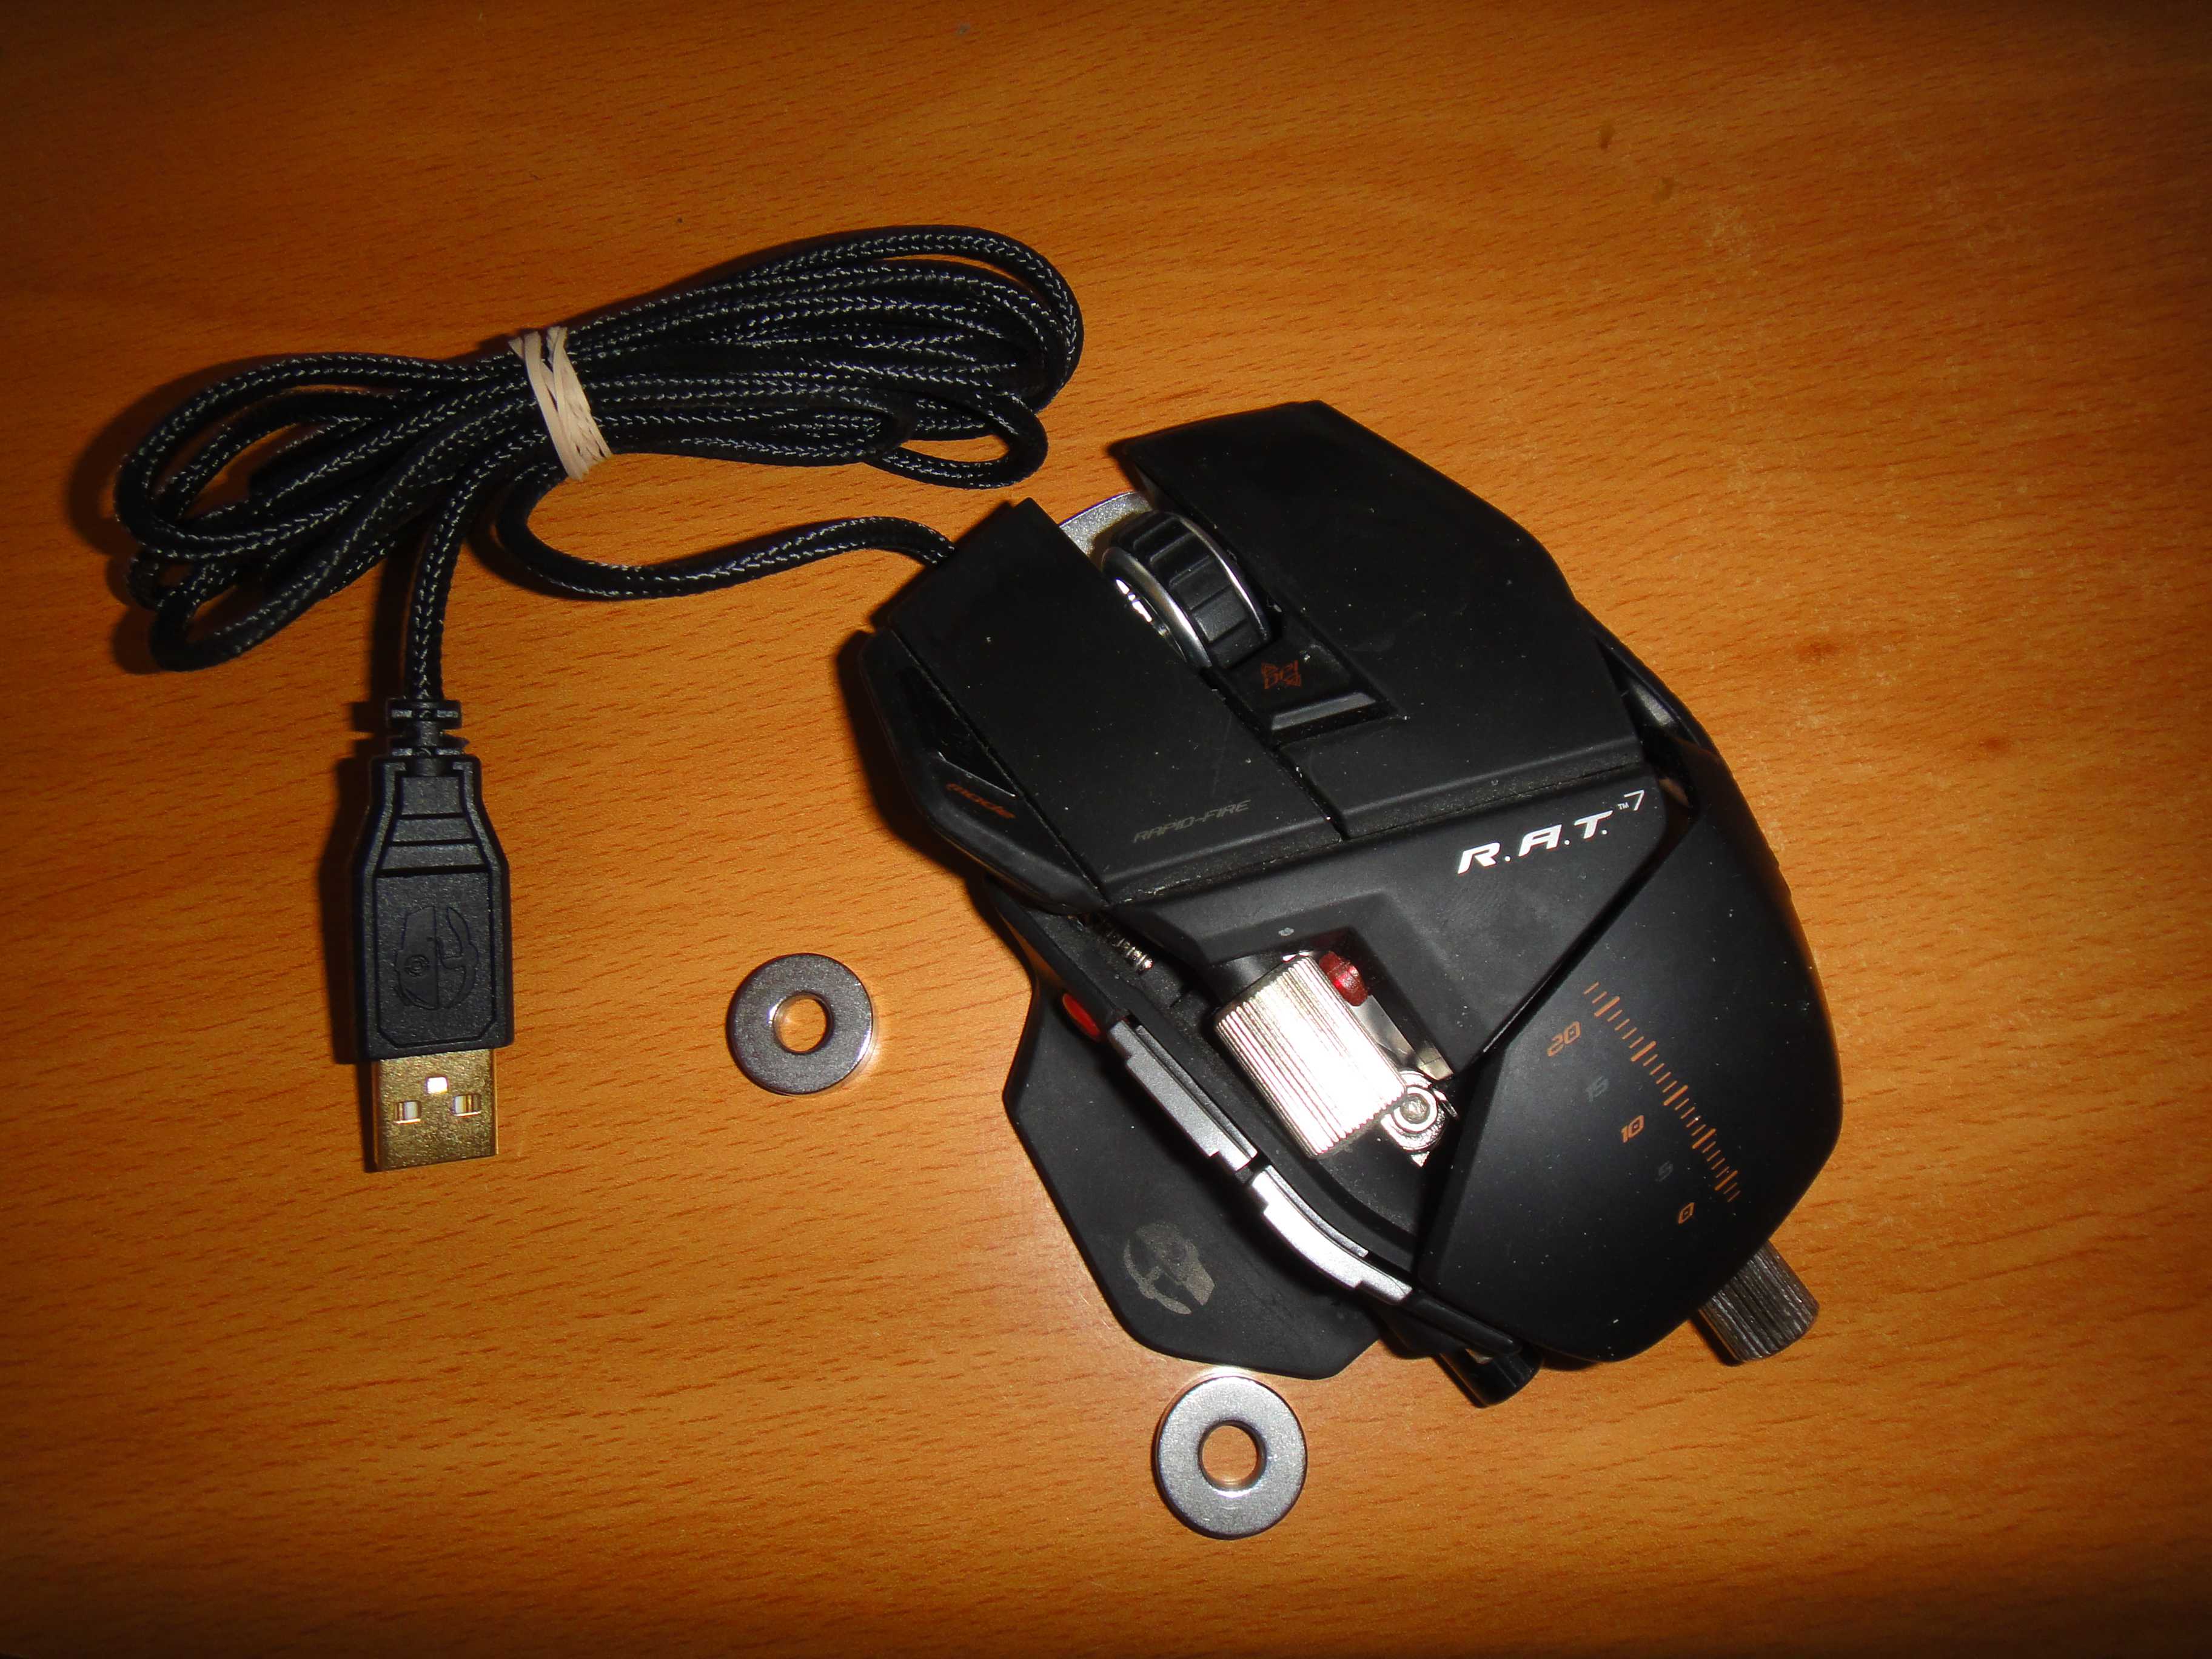 Madcatz R.A.T. 7 Mouse Repair